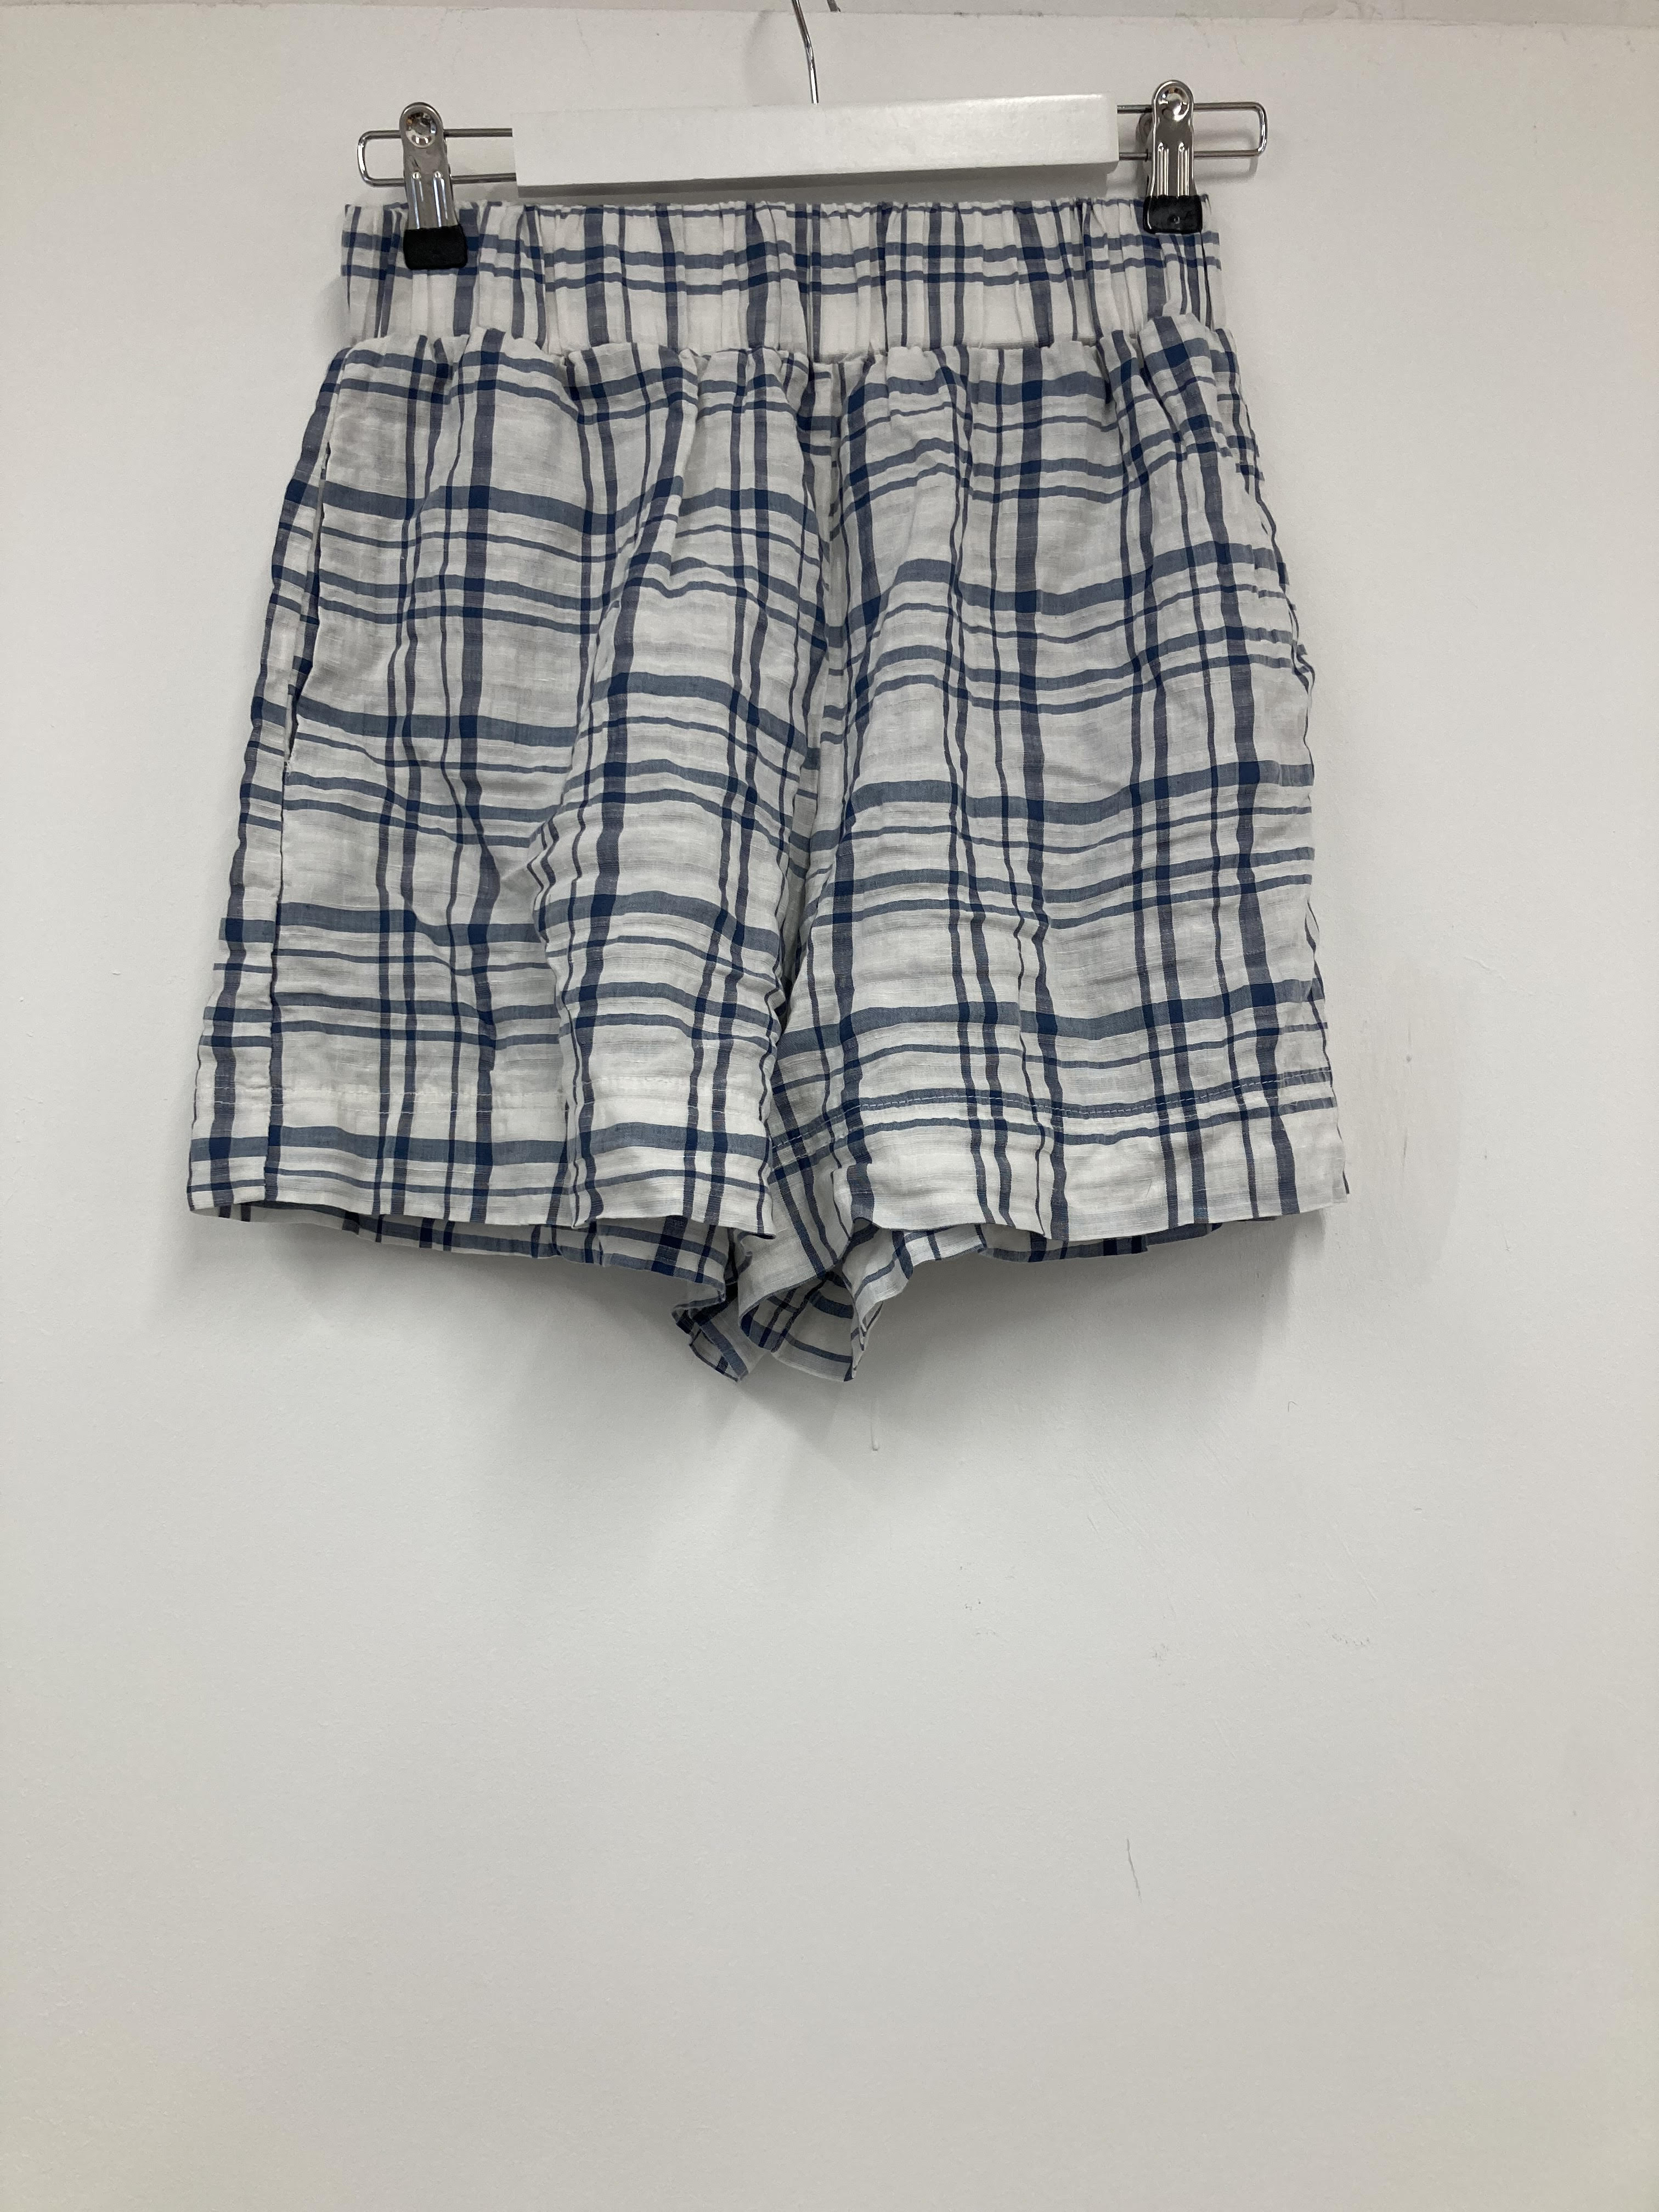 Gilma-Cay Shorts in Check Size S